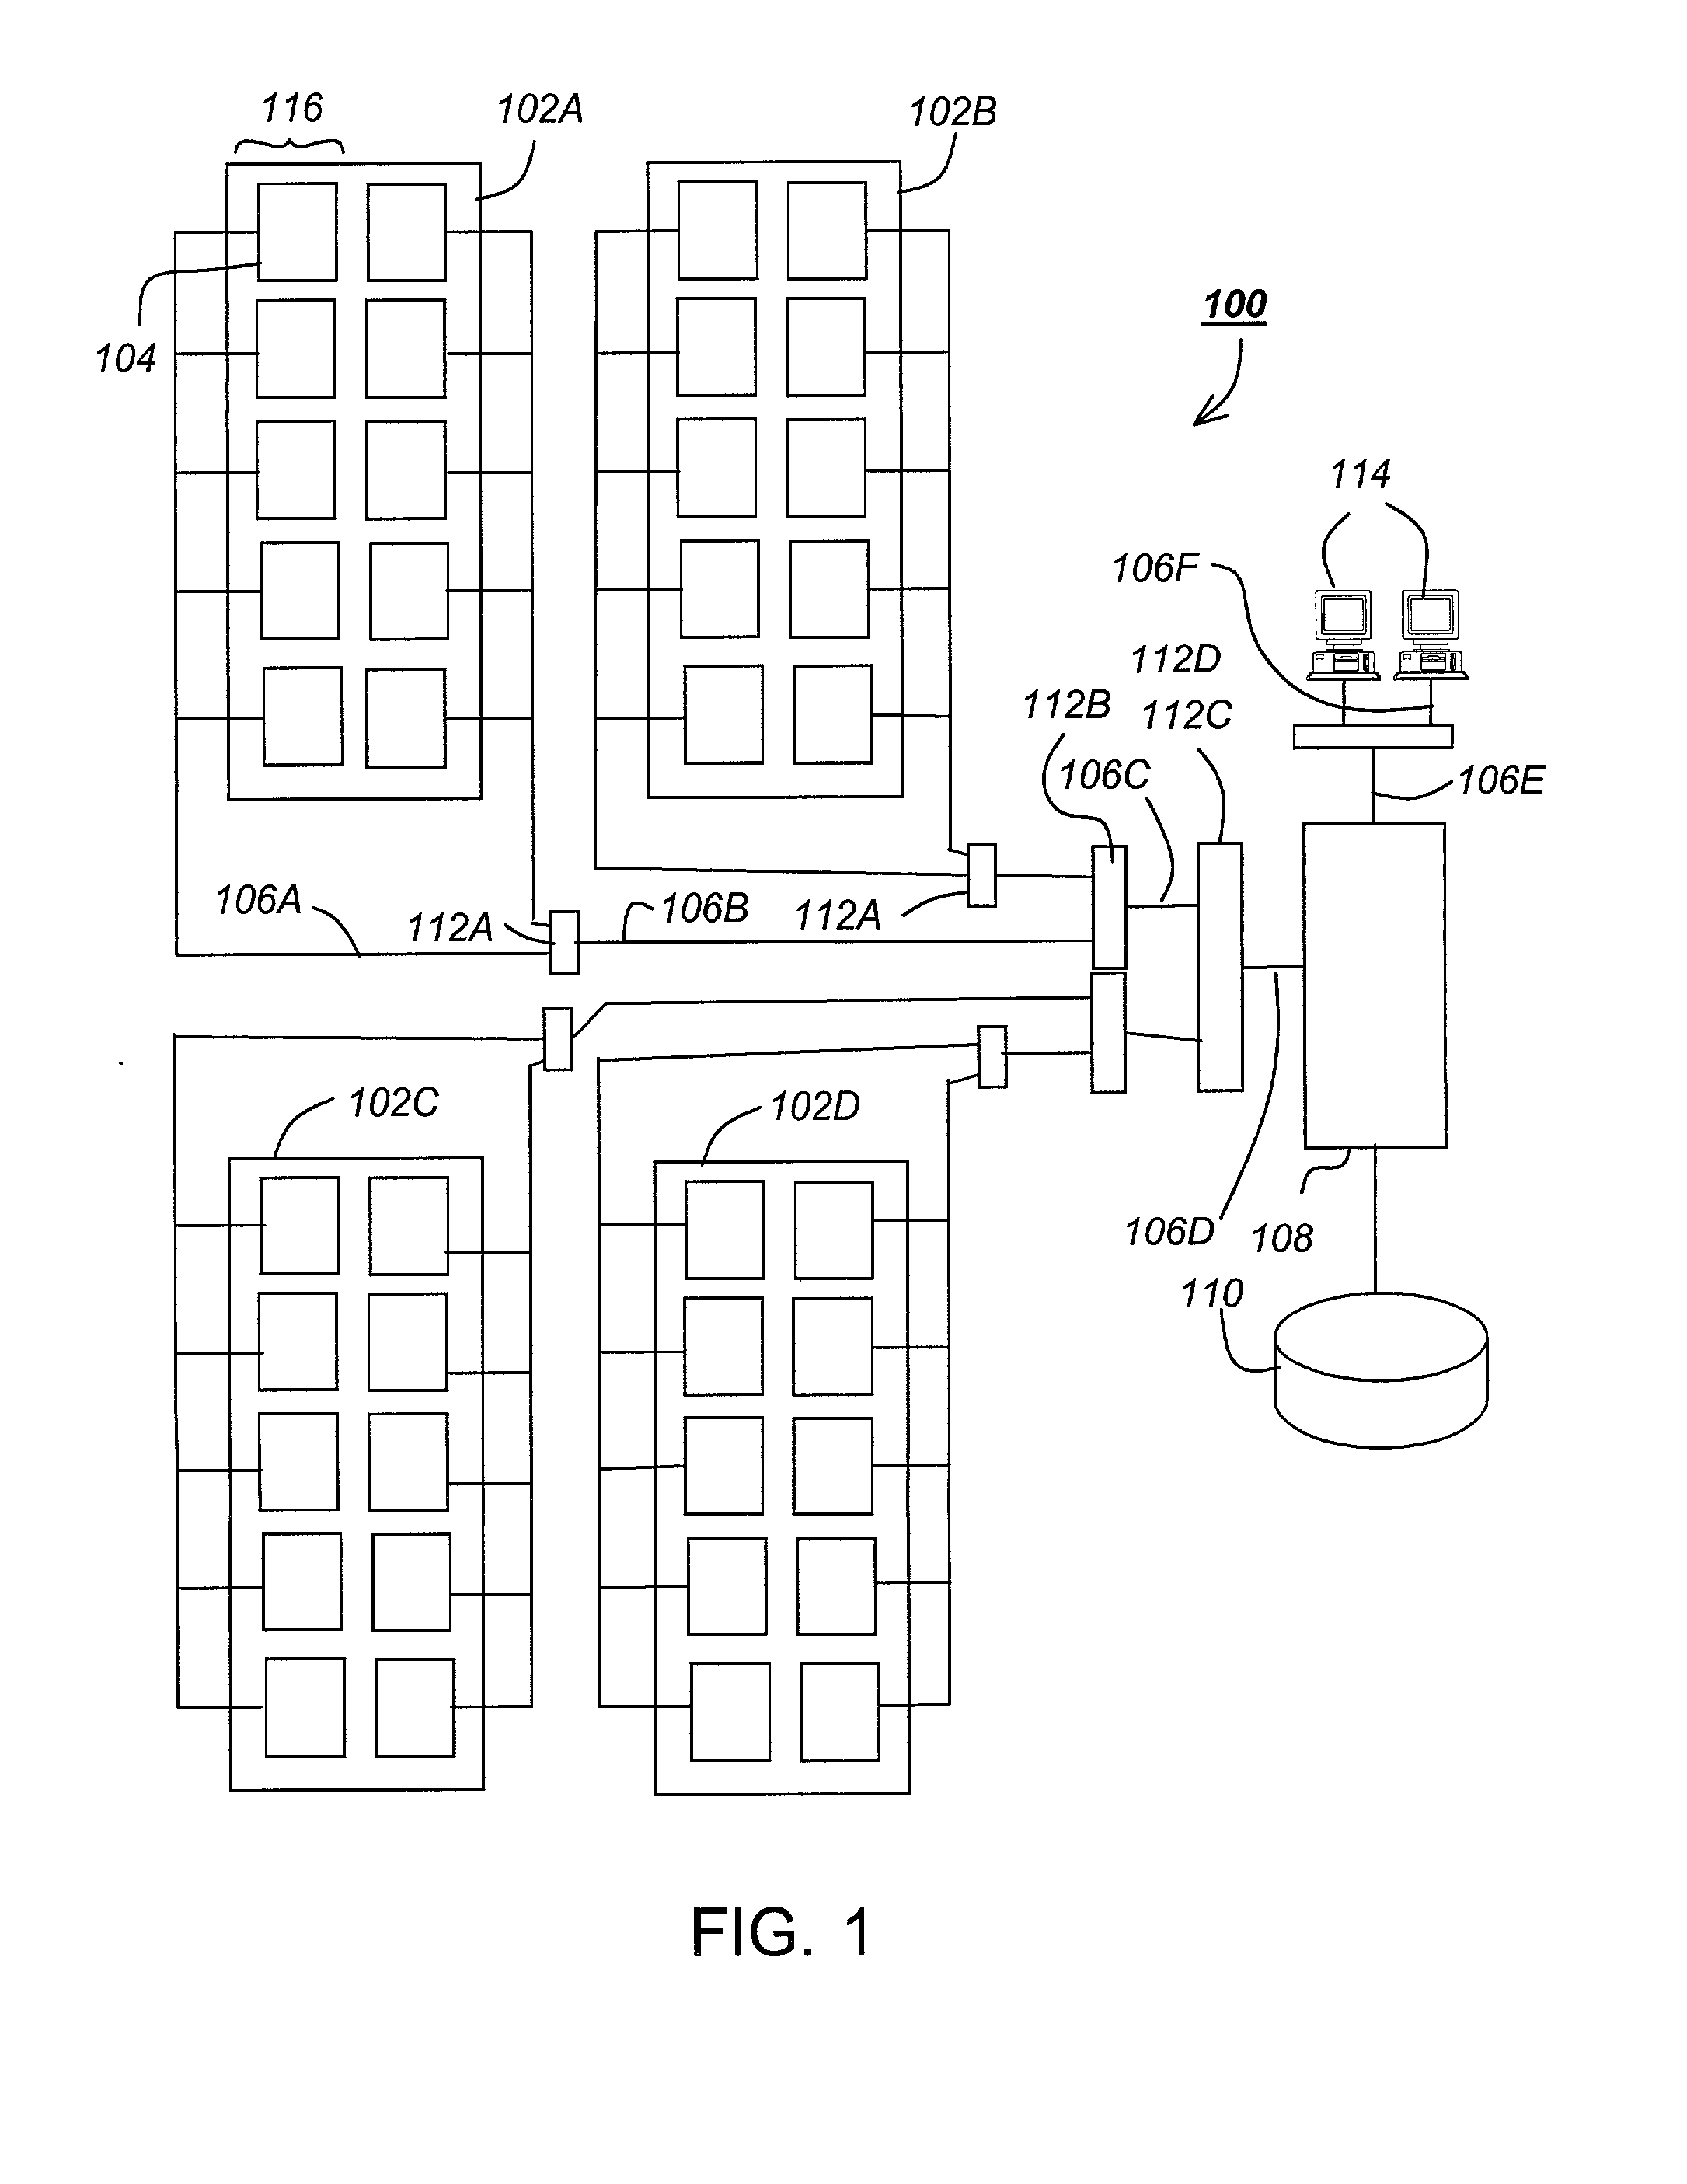 Method and apparatus for scrip distribution and management permitting redistribution of issued scrip